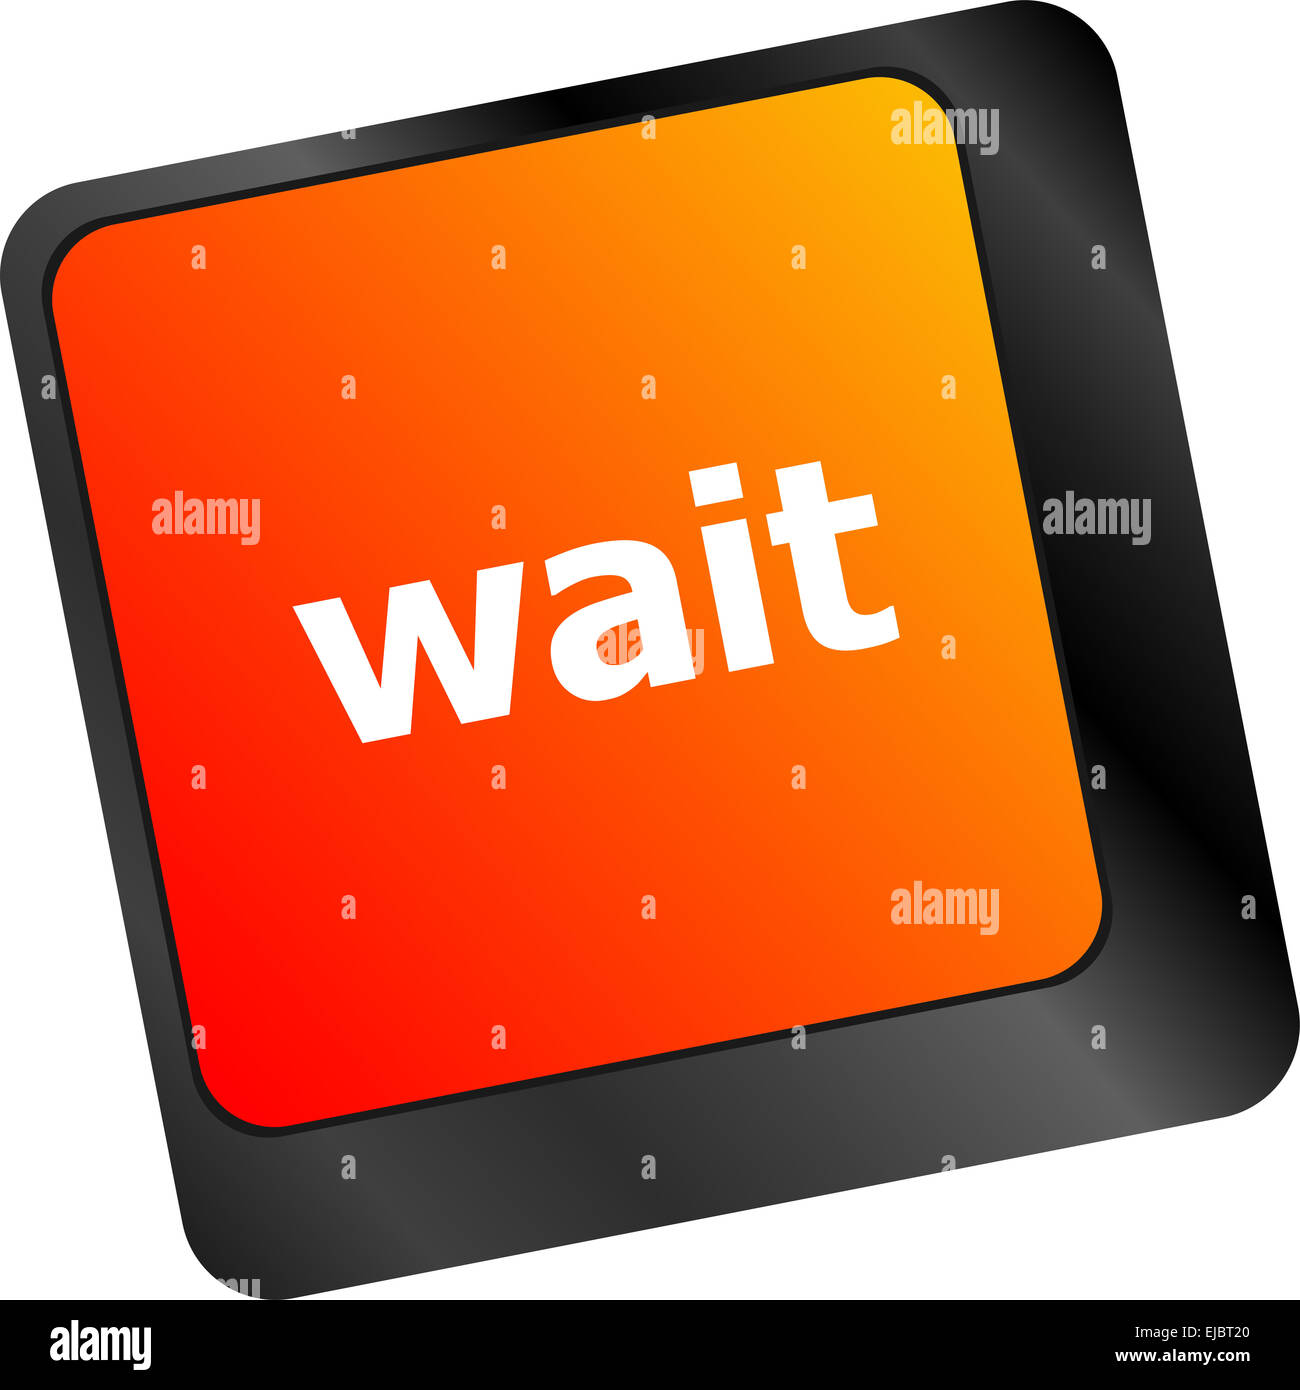 wait word button on a computer keyboard Stock Photo